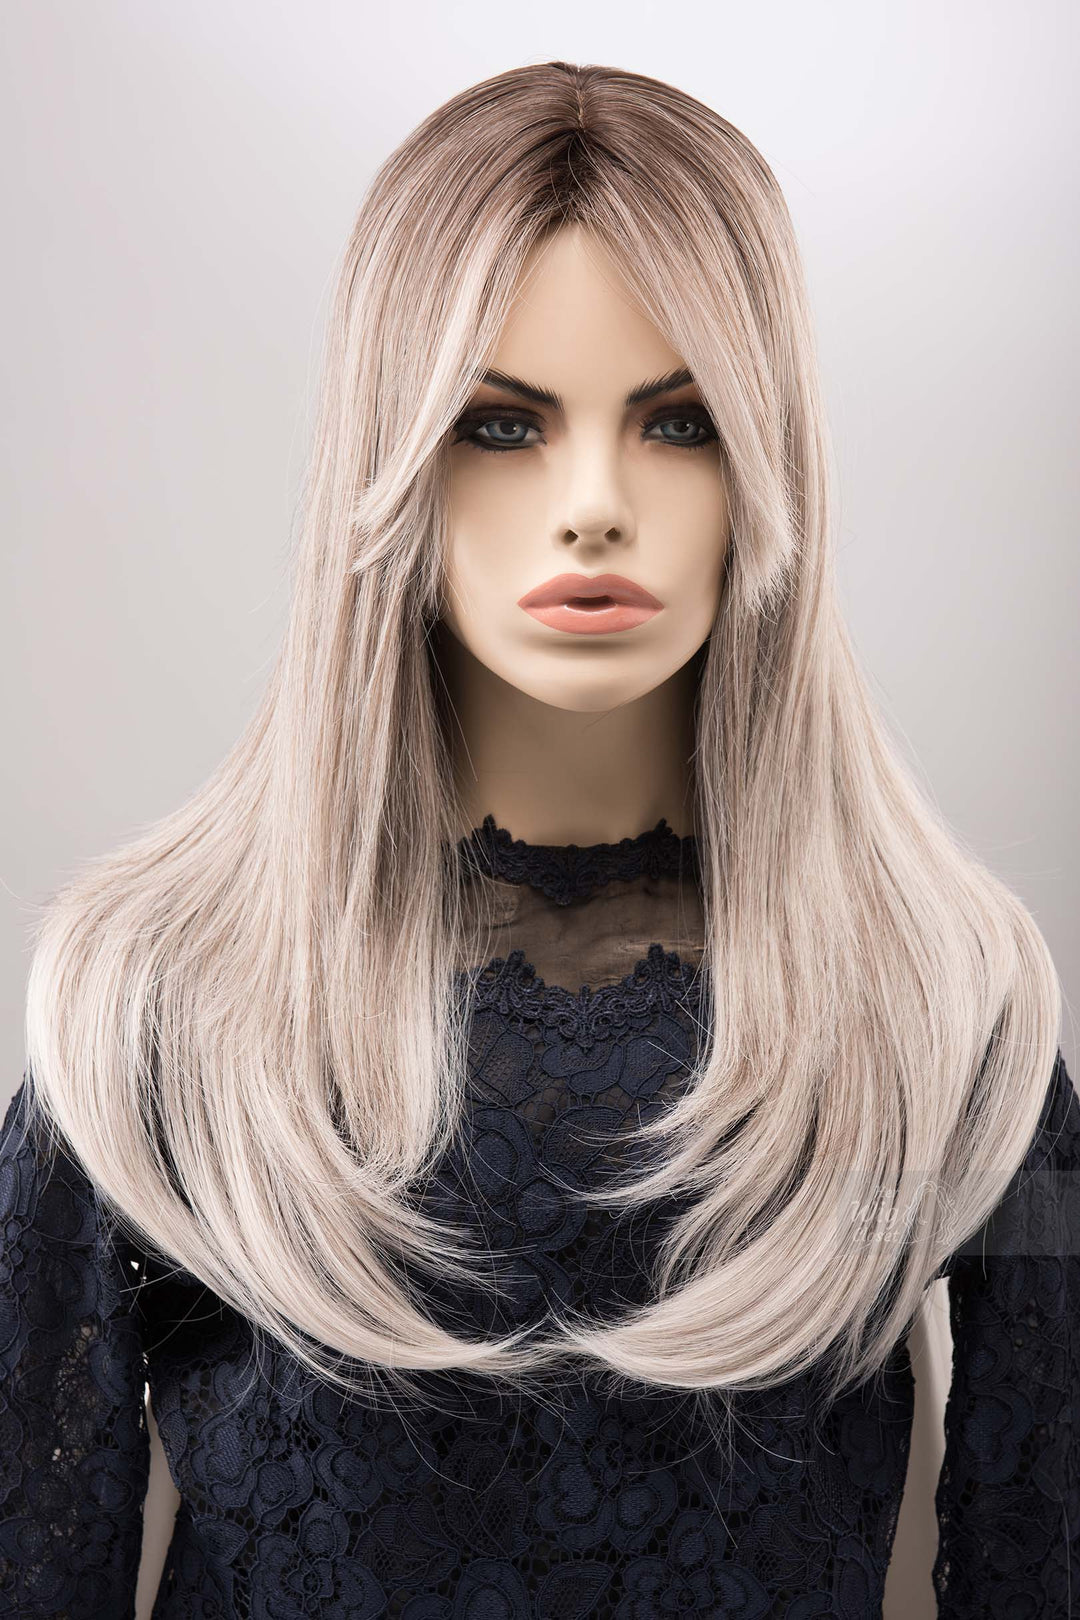 Salt and Pepper Wig with Bang Ombre Silver Grey Wig Multi Gray Balayage Long Wig Side Curtain Bangs Cosplay Wig Party Hair Loss Wig ODILE